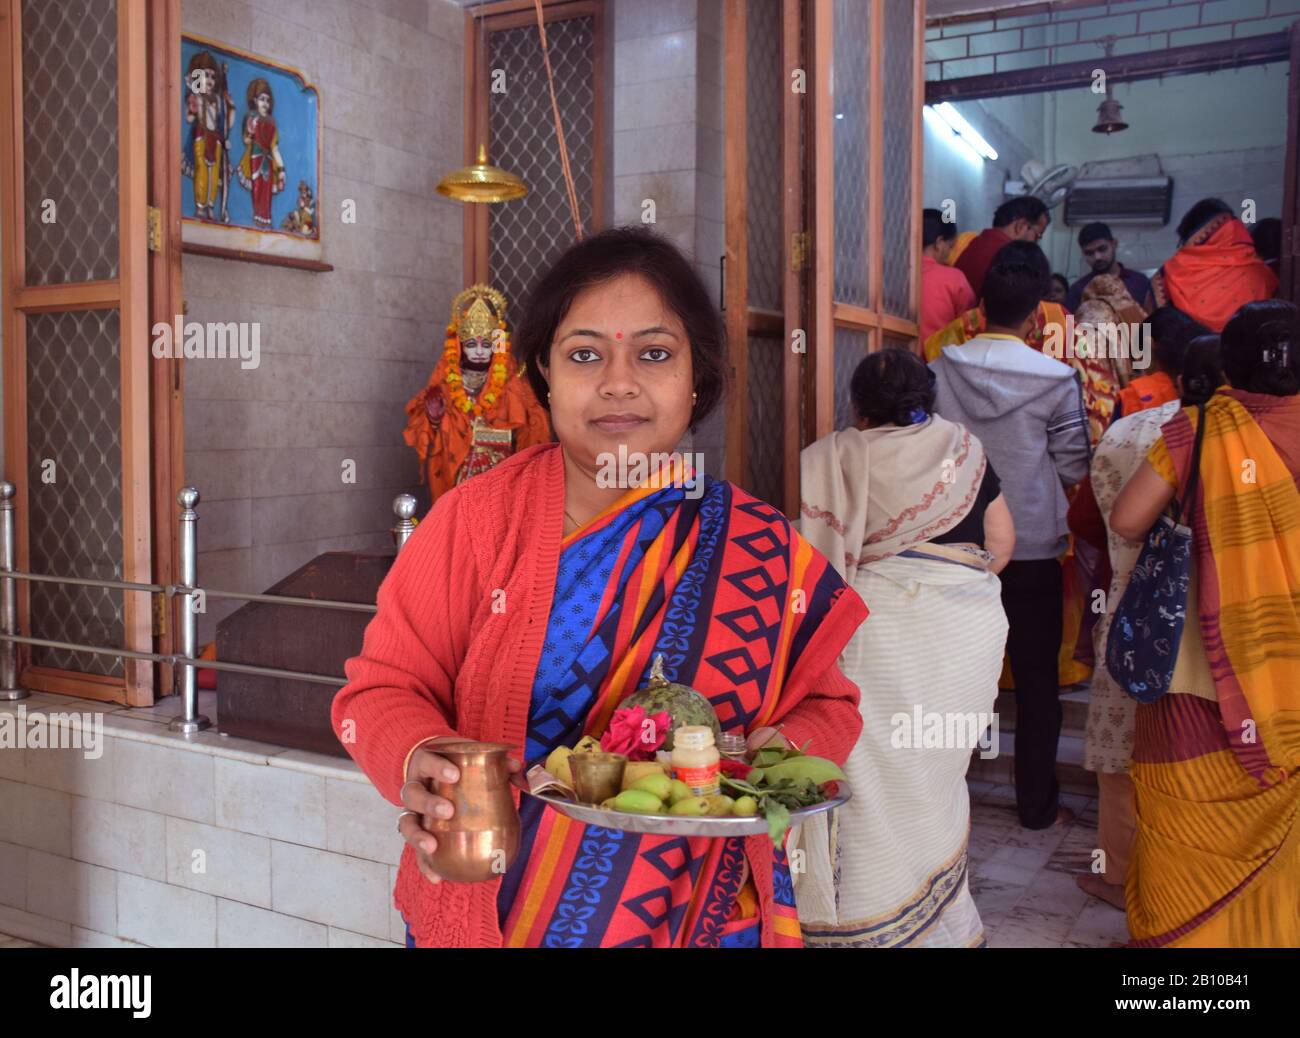 A Indian Women devotee with her Puja Thali during Shivratri Festival in India Stock Photo